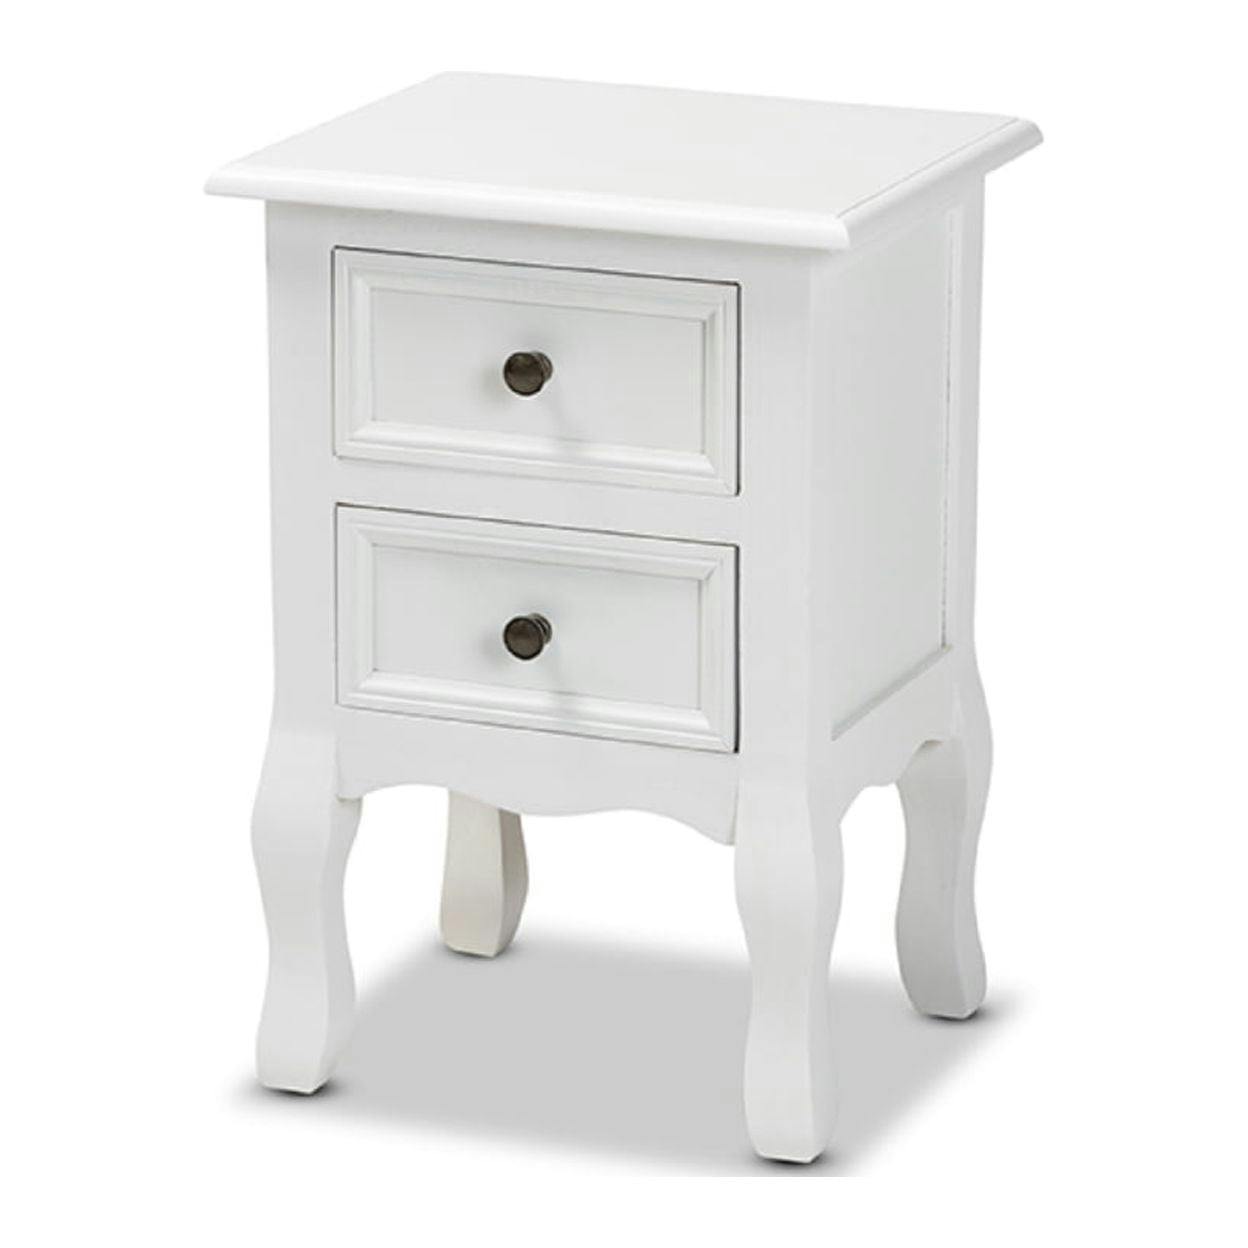 Caelan Classic White 2-Drawer Nightstand with Cabriole Legs